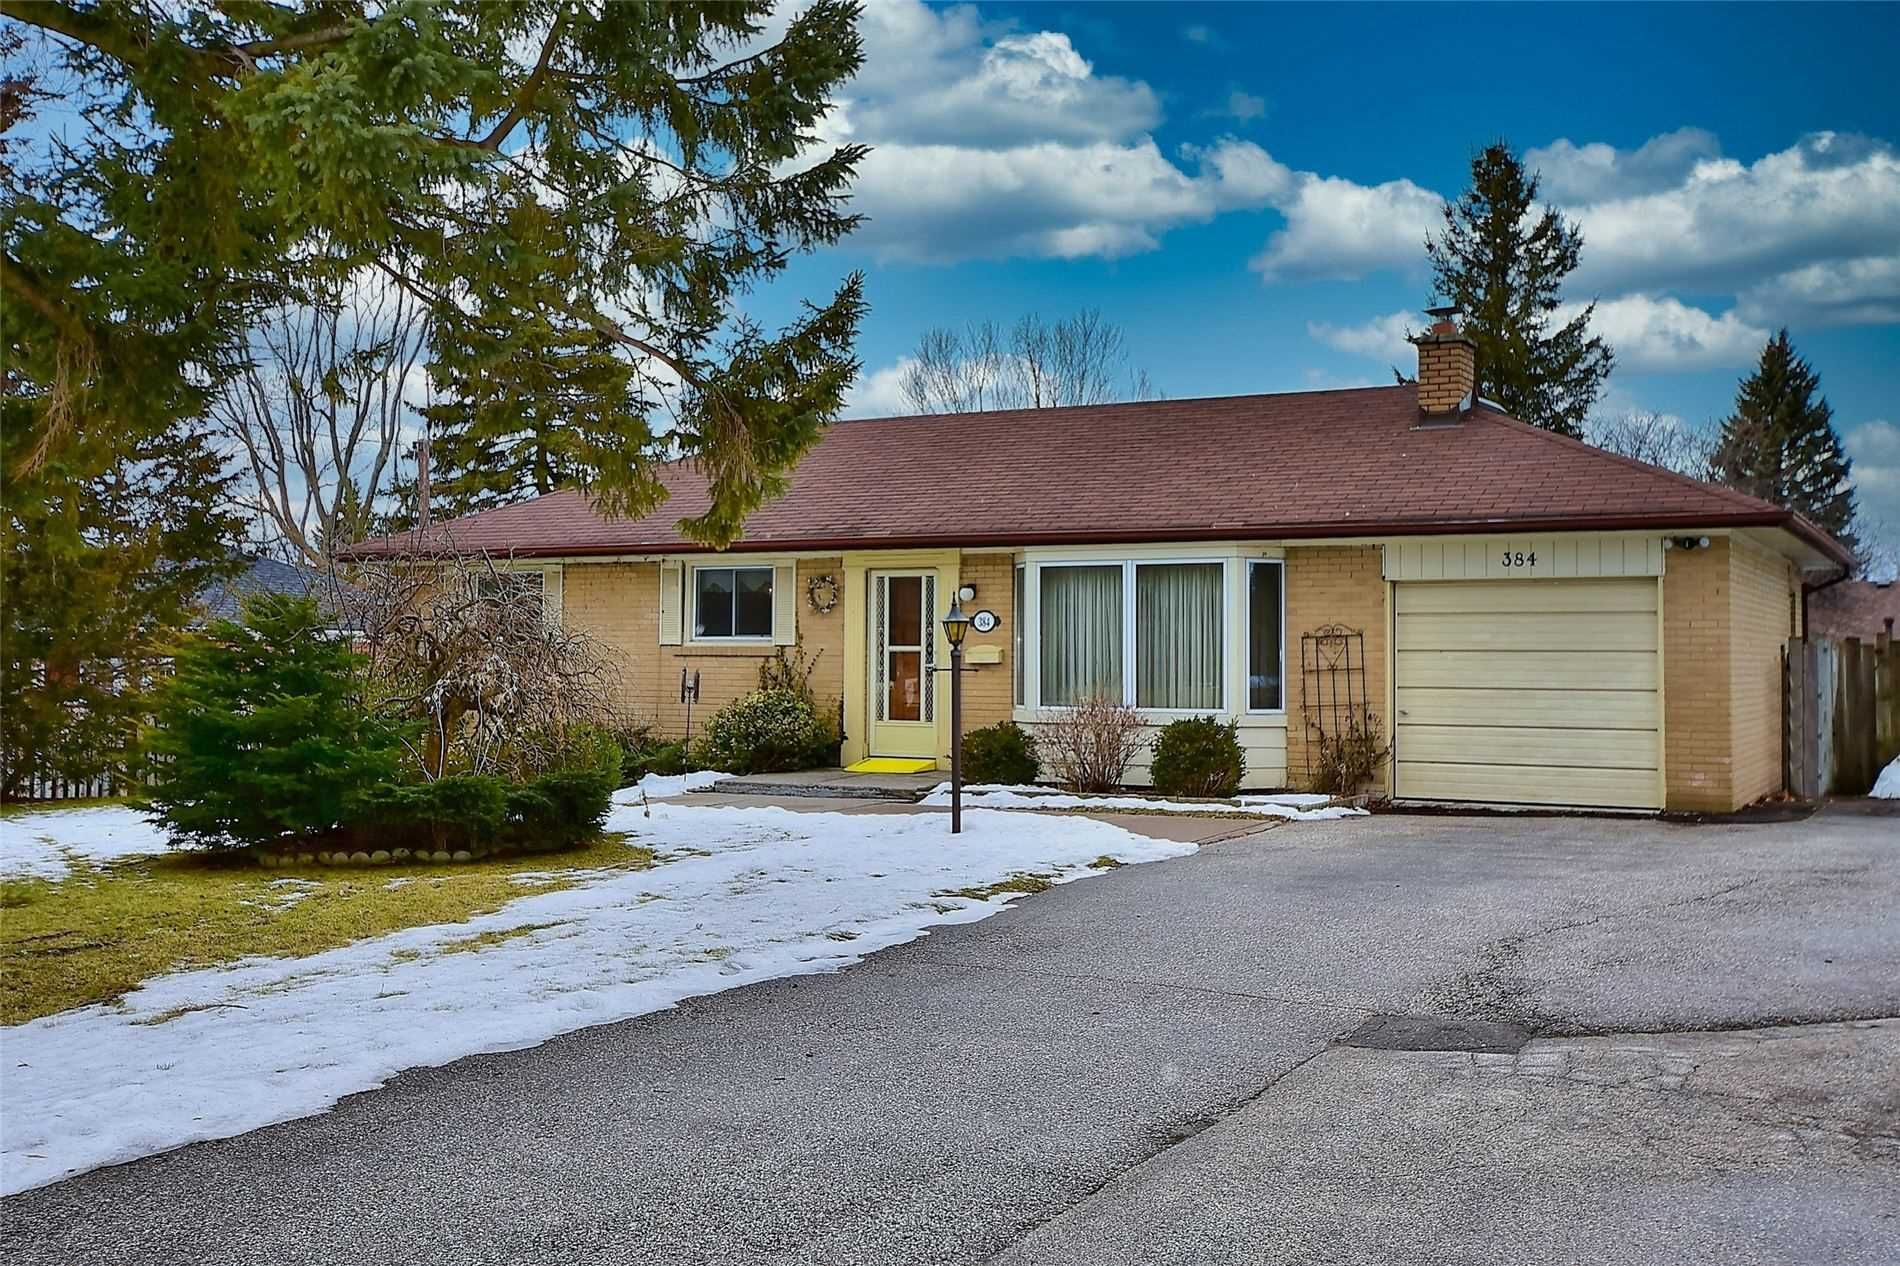 Main Photo: 384 Rouge Highlands Drive in Toronto: Rouge E10 House (Bungalow) for sale (Toronto E10)  : MLS®# E4679326